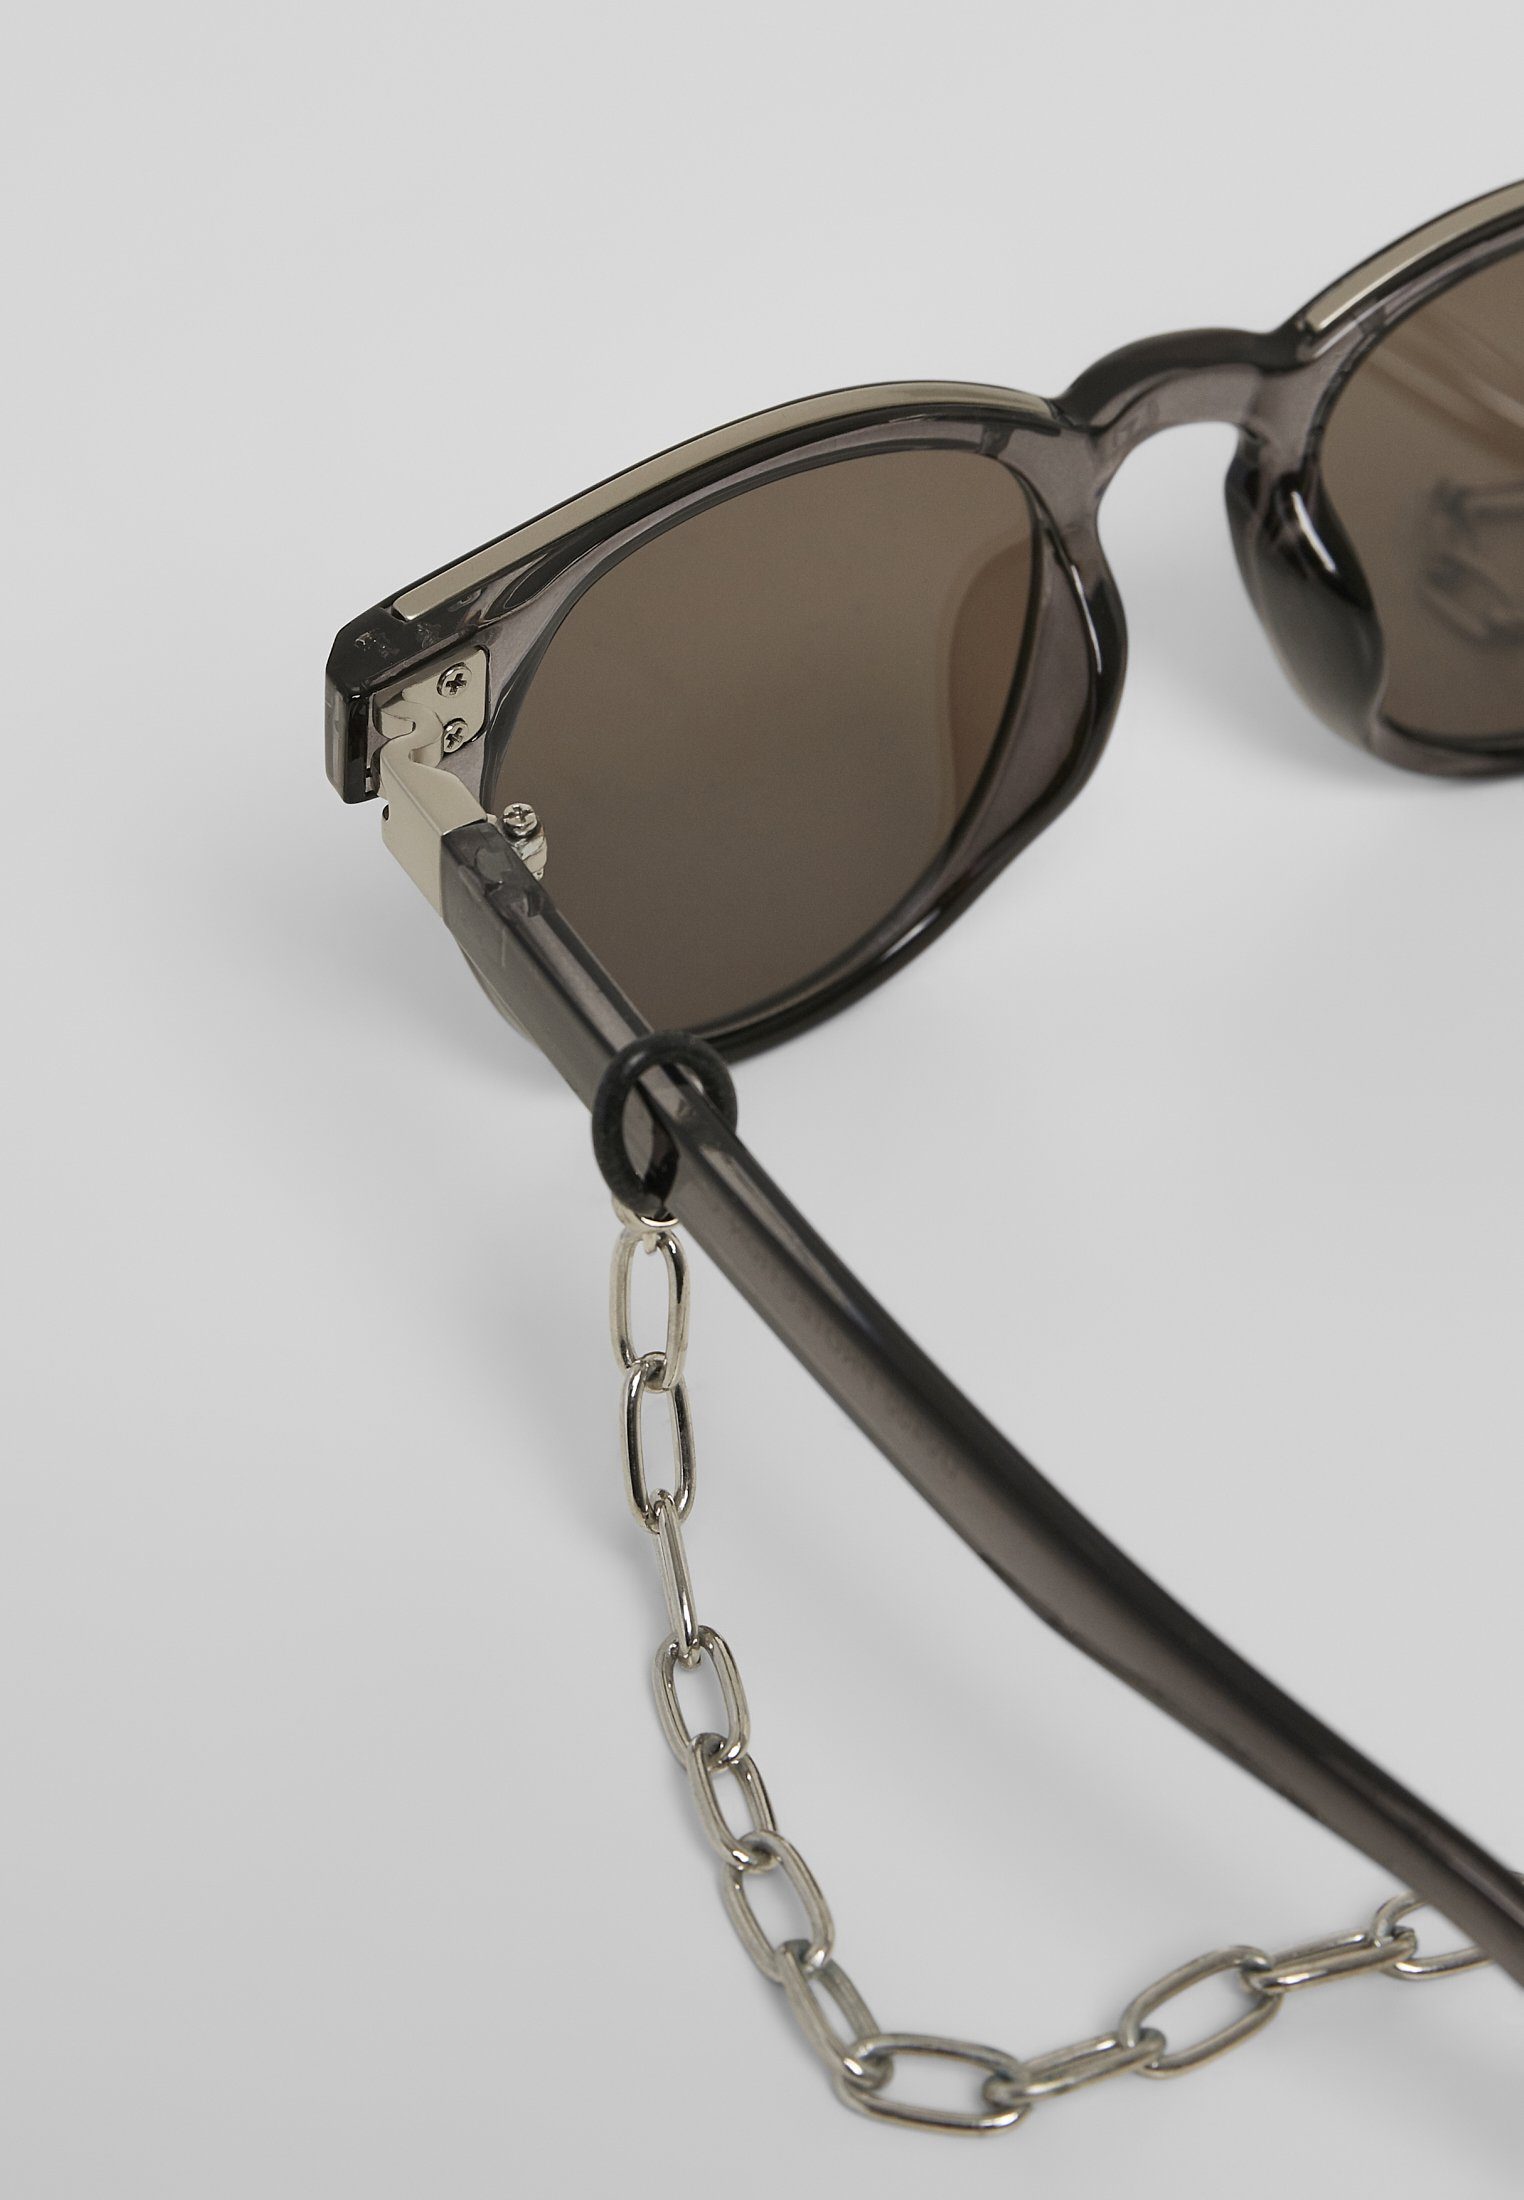 Unisex Italy Sunglasses grey/silver/silver chain CLASSICS with URBAN Sonnenbrille